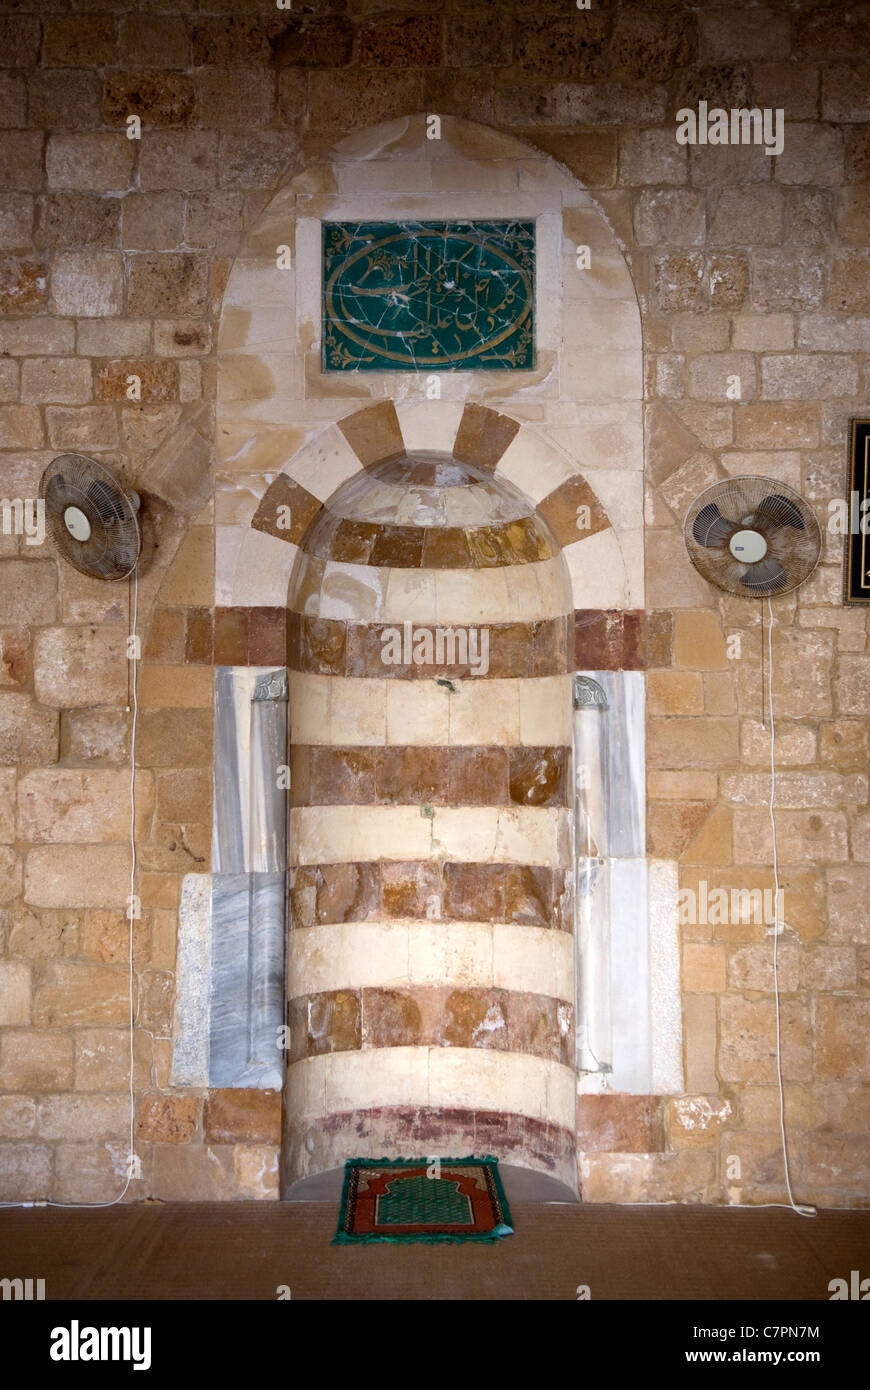 Mihrab (indicating direction of Mecca for prayer) in the Great Mosque, Sidon, southern Lebanon. Stock Photo